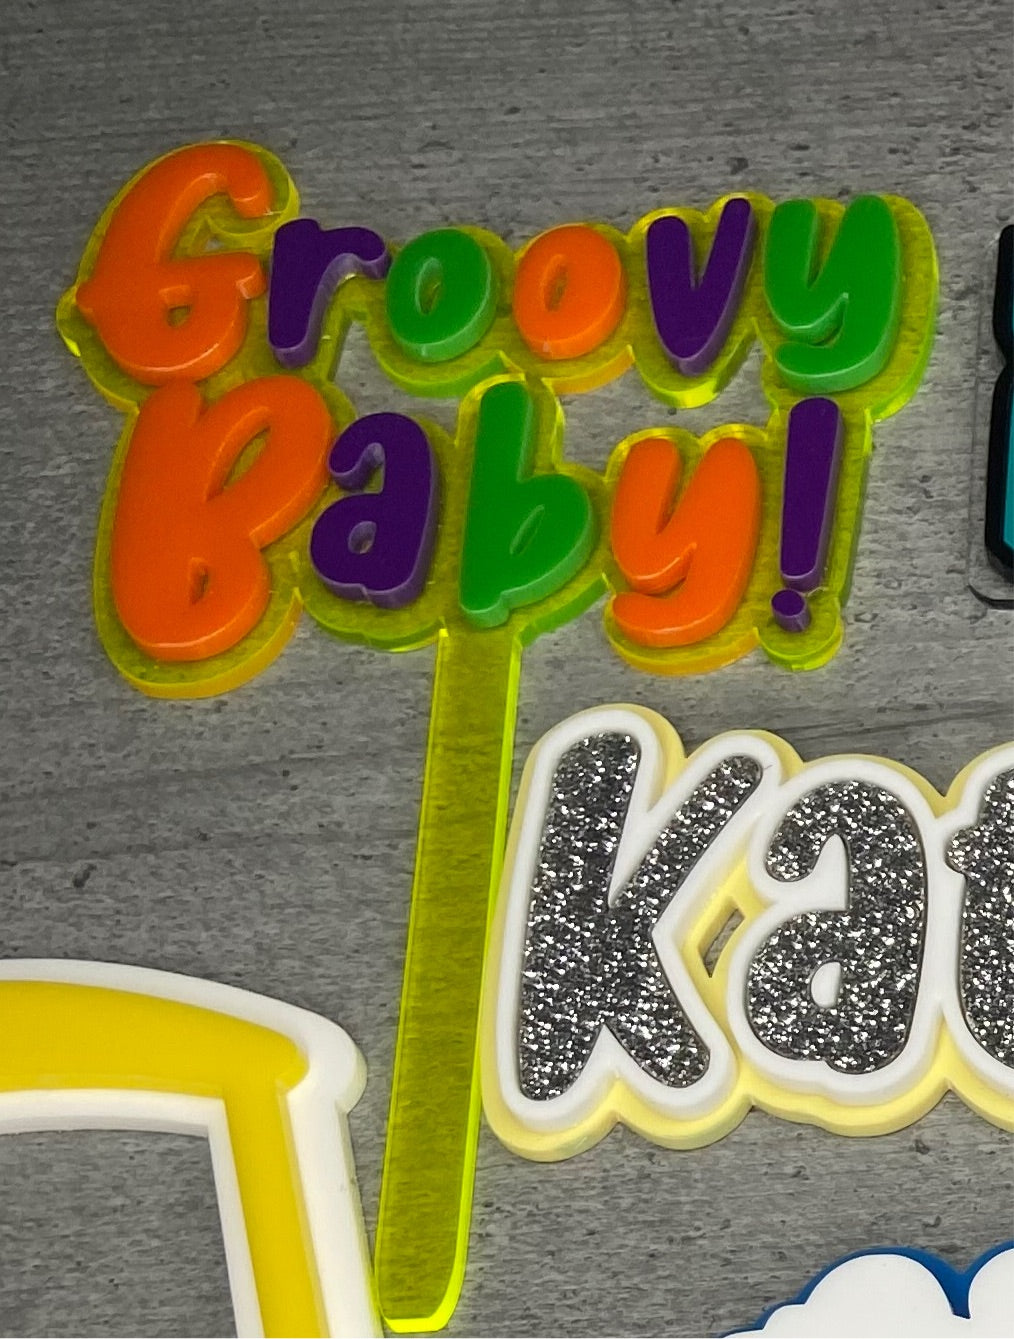 Groovy Baby! cake topper